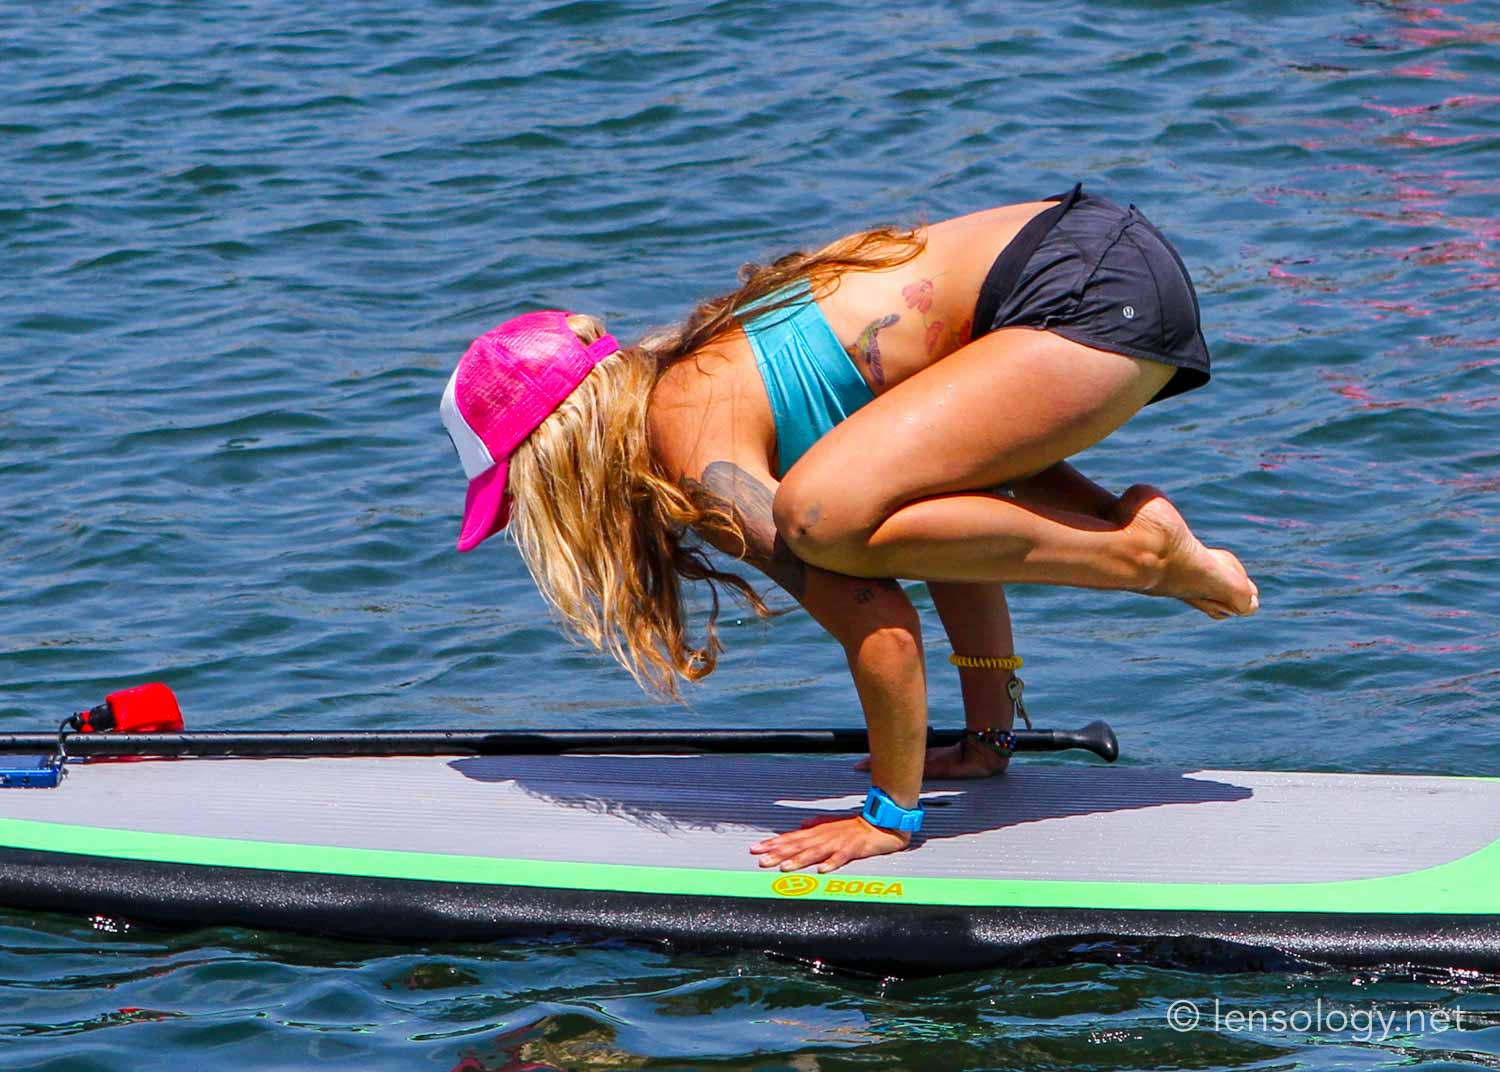 LENSOLOGY.NET - YOGAqua promo shoot. YOGAqua brings yoga into fusion with stand up paddle boarding, LA, CA.
All images are copyright of Lensology.net
Email: info@lensology.net
www.lensology.net